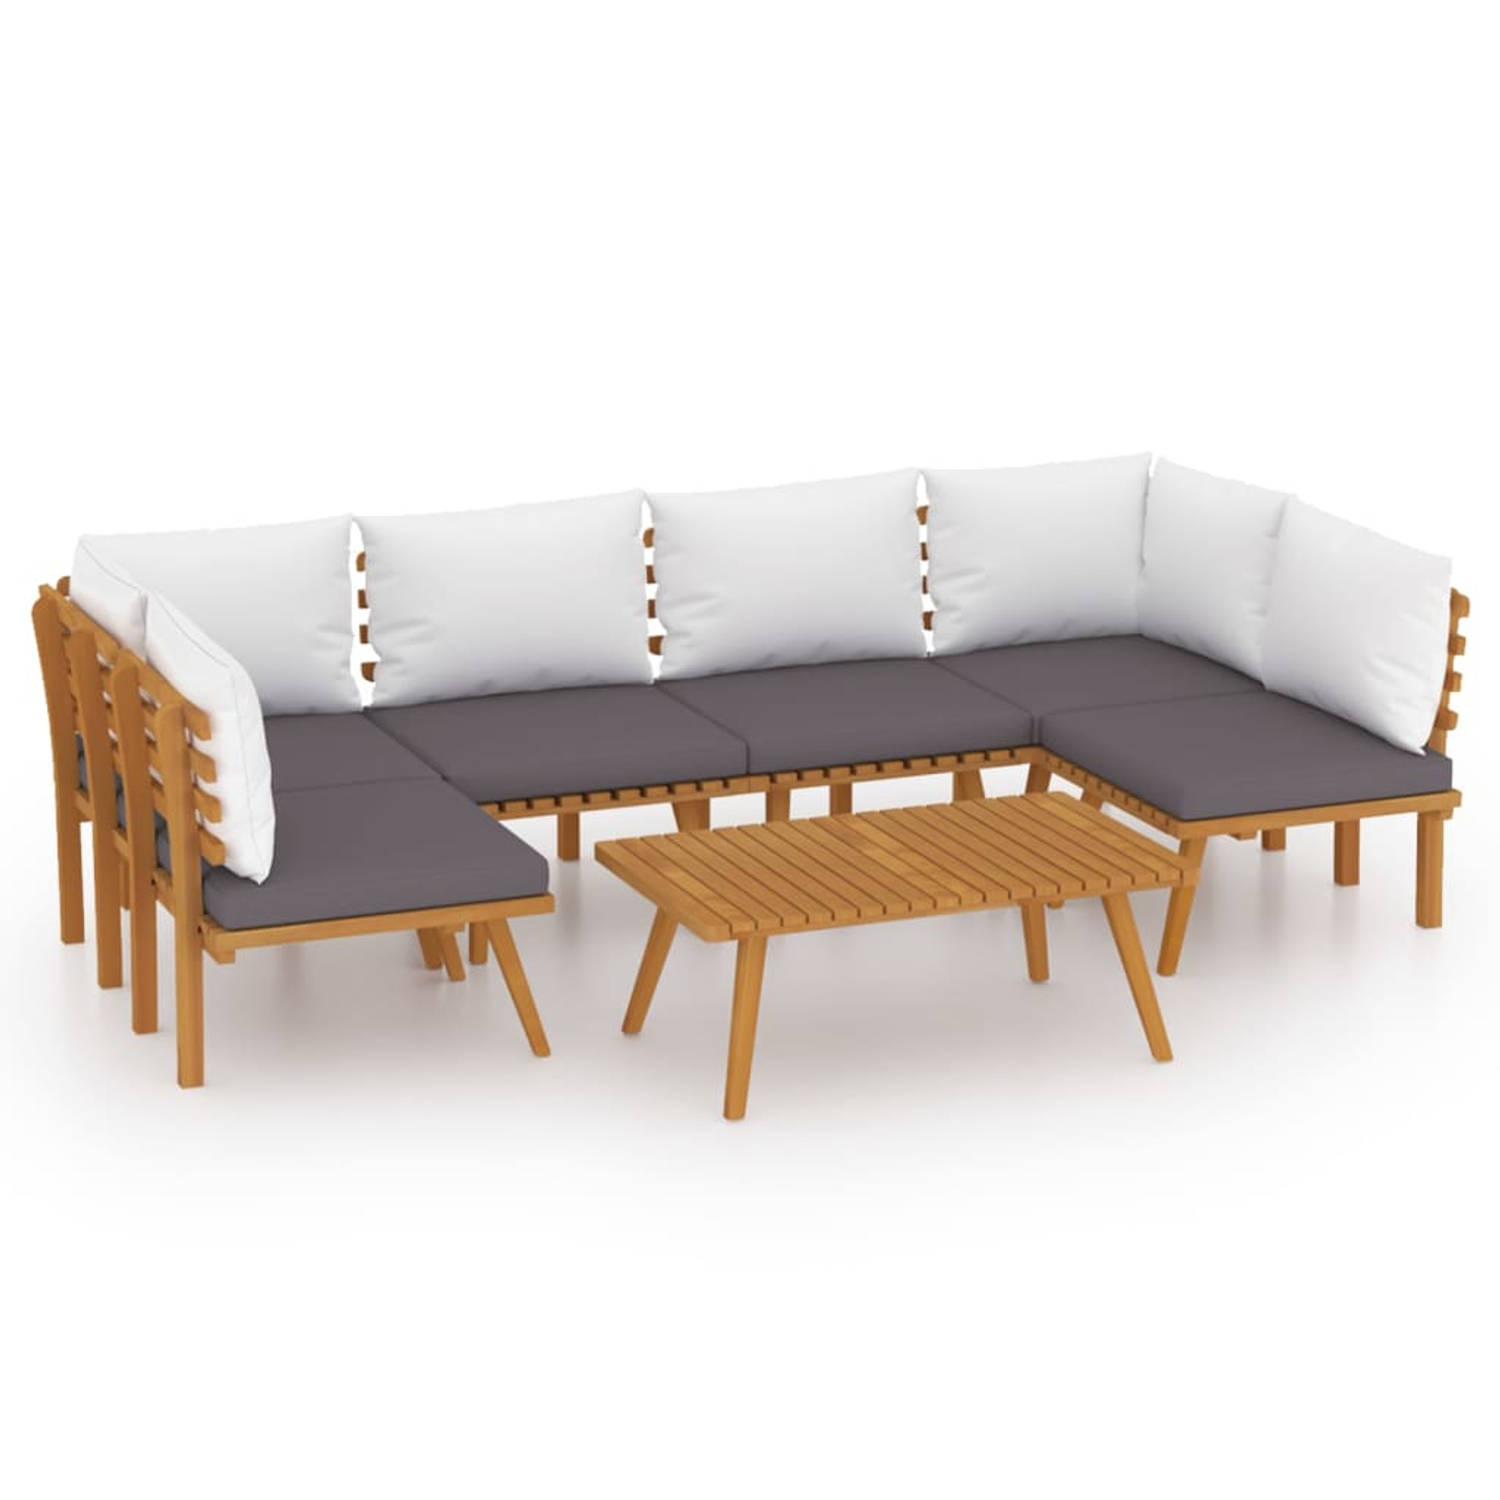 The Living Store Tuinset Acaciahout Loungebank 90x55x35 cm Donkergrijs en wit